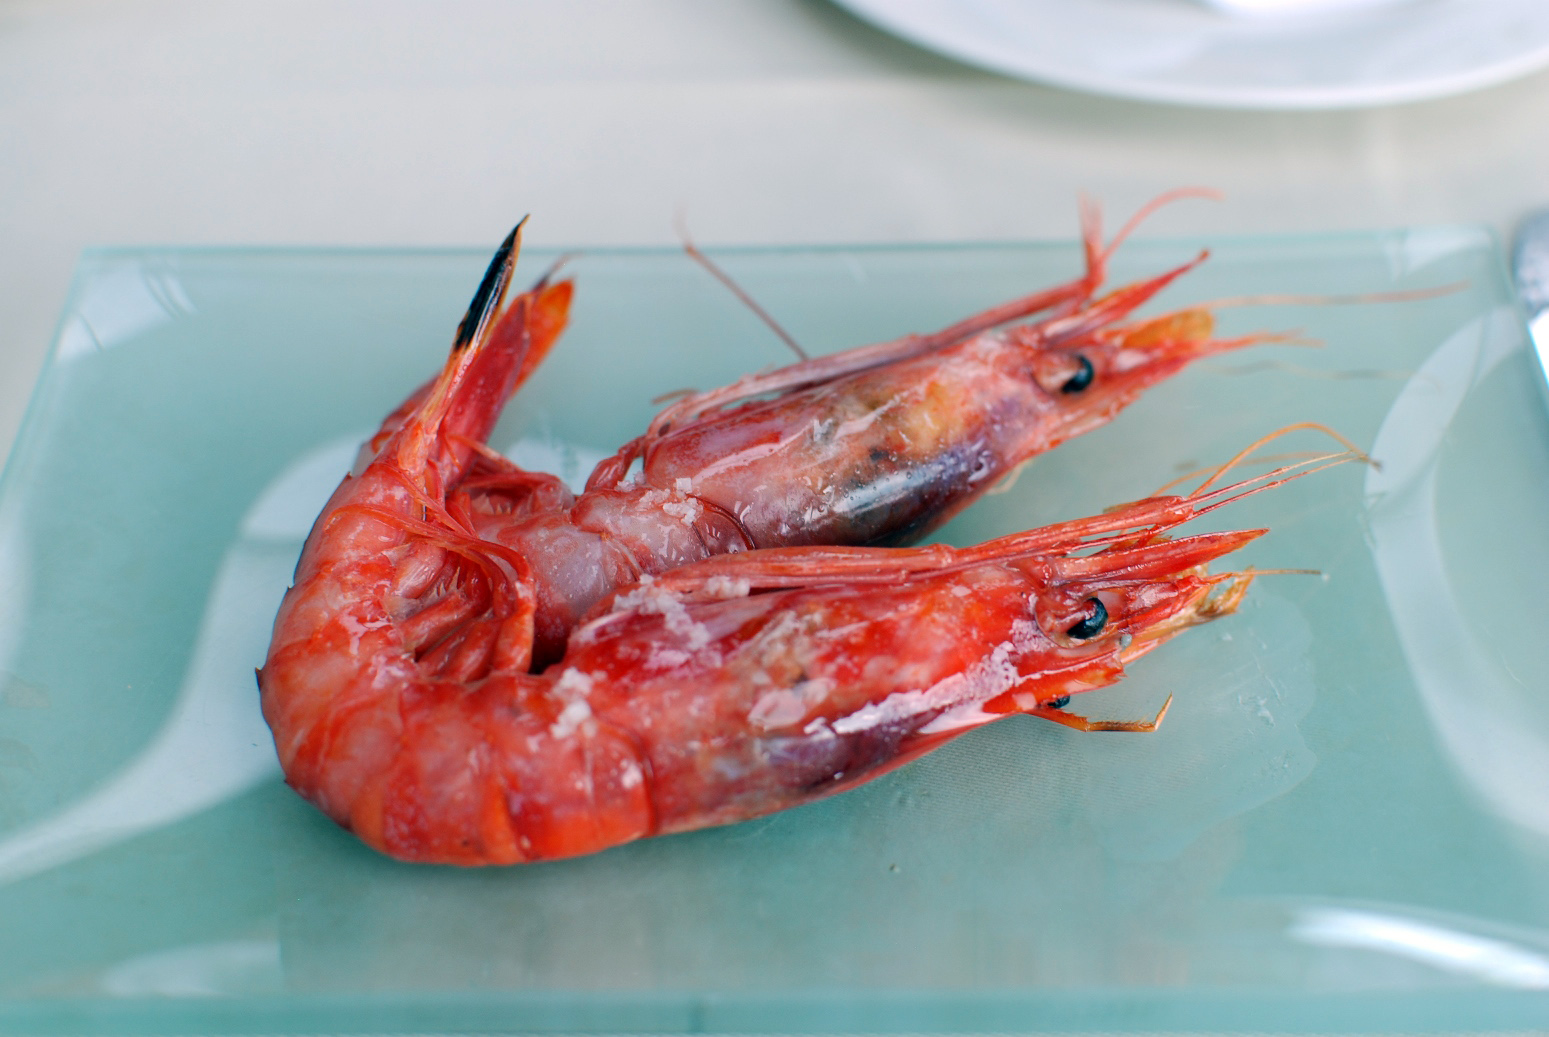 The best red prawns at Asador Etxebarri | NY Food Journal